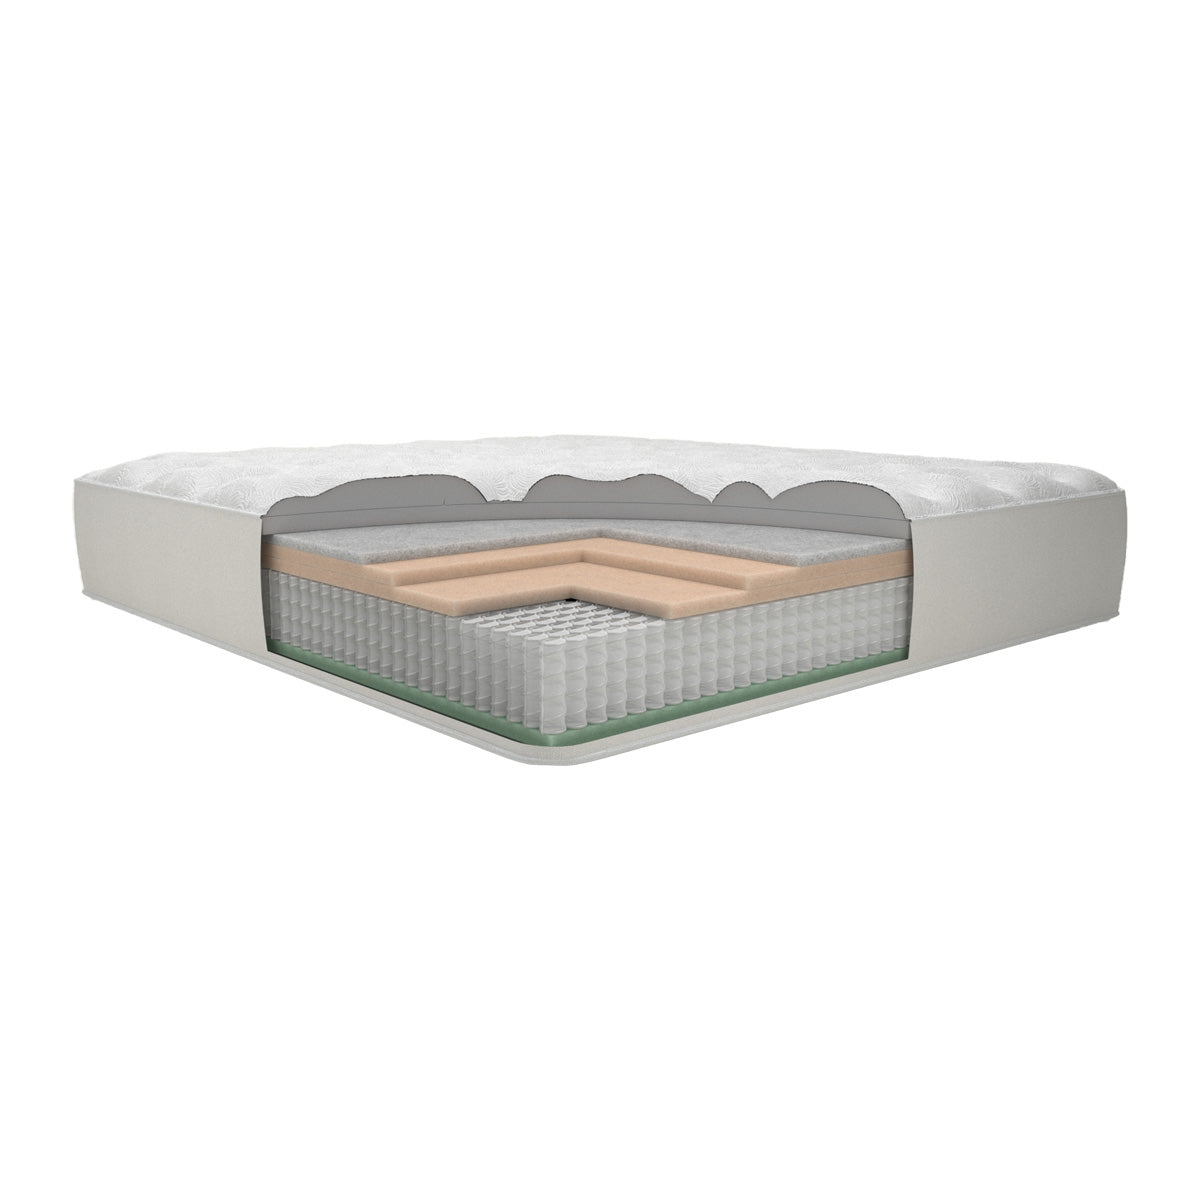 Nature's Finest Tight Top Mattress by Englander Firm, Image showing the Materials used inside the Mattress